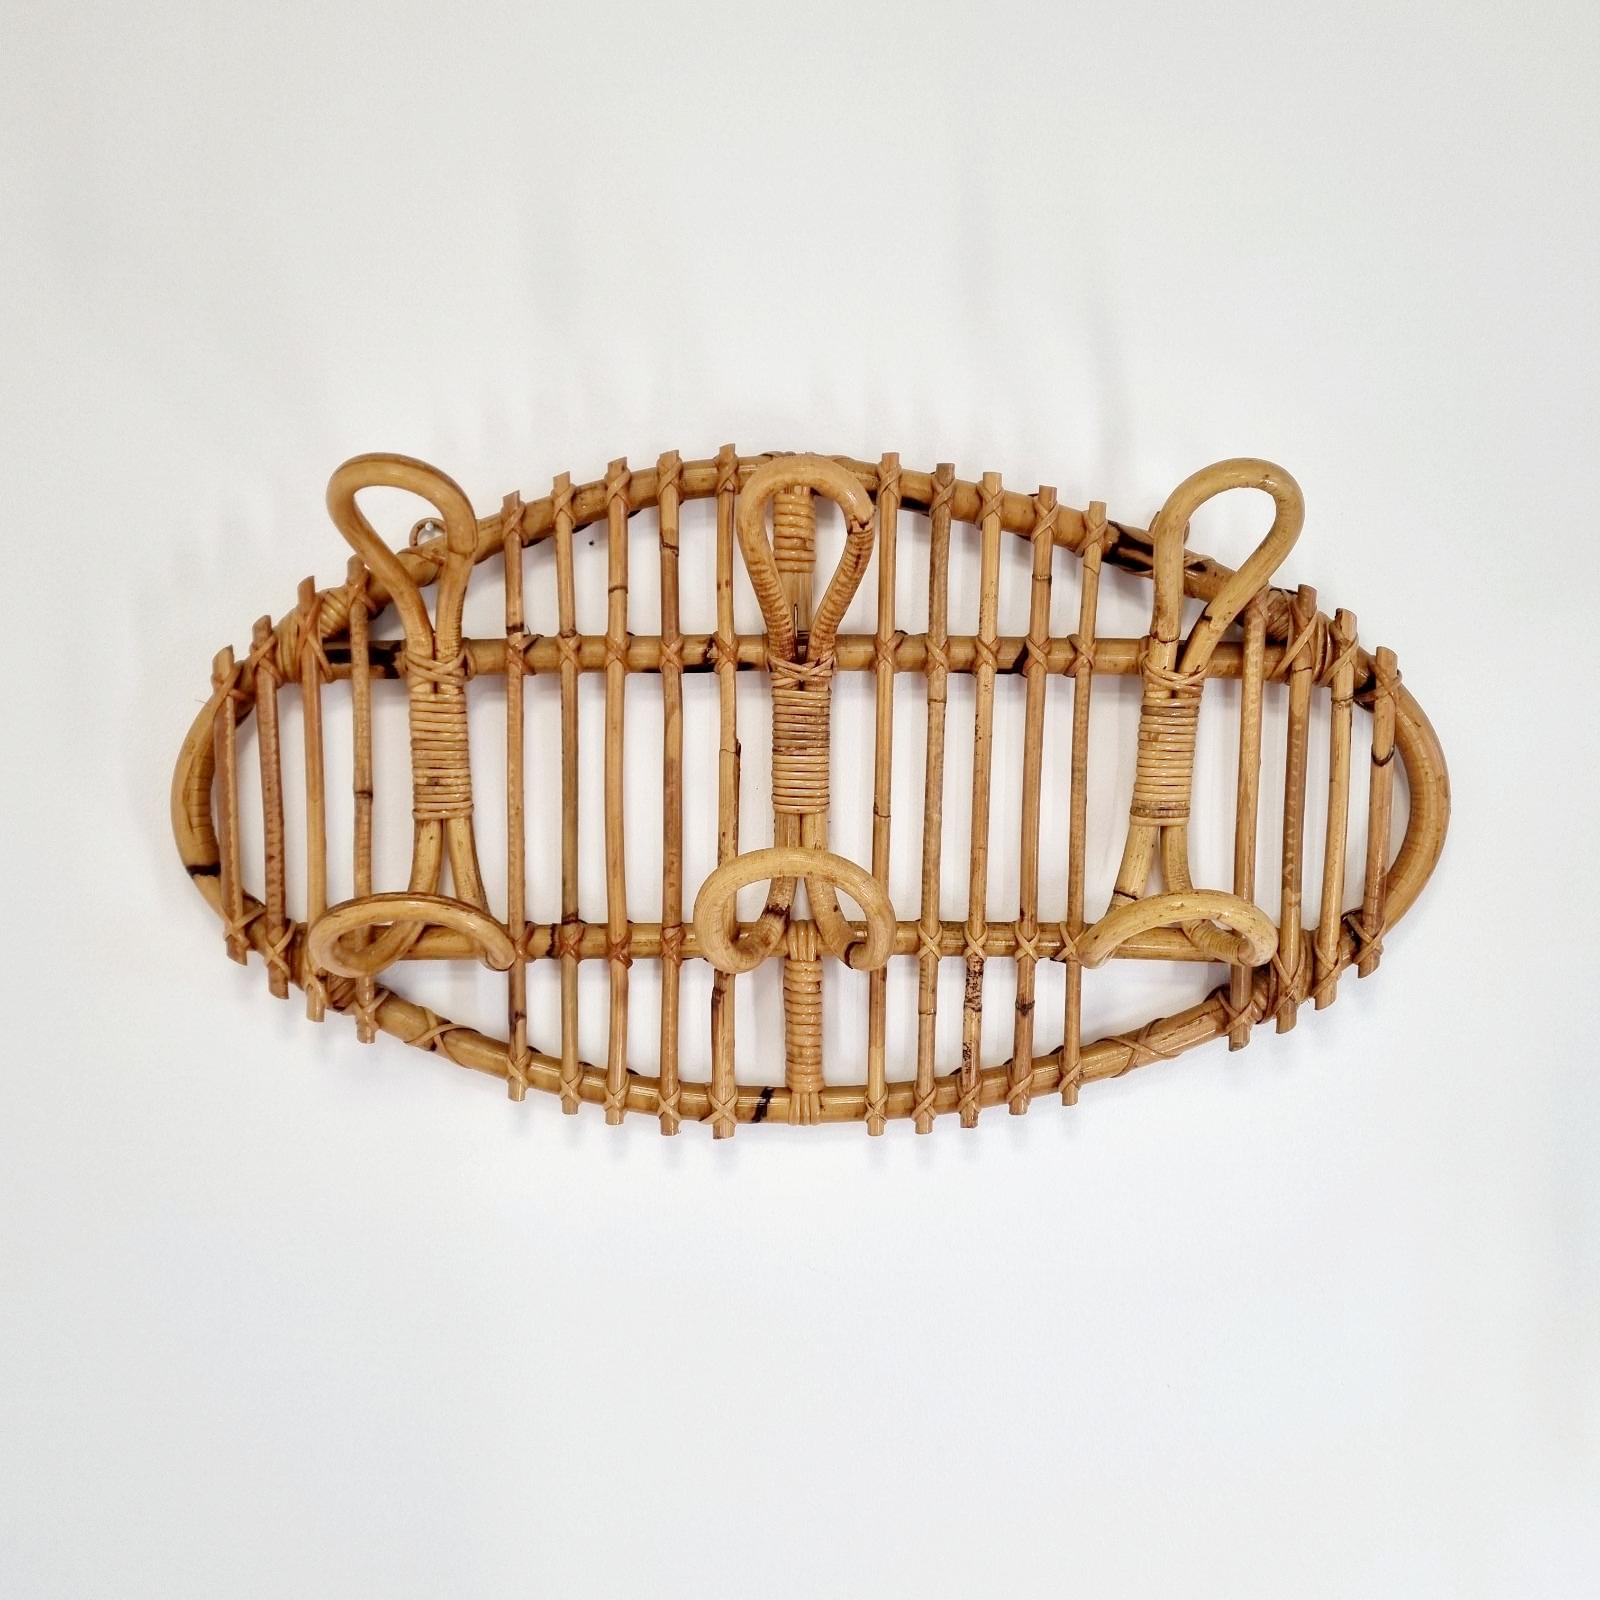 Very nice wall rack hanger in bamboo and rattan.
Attributed to Franco Albini

Made in Italy in the 70s